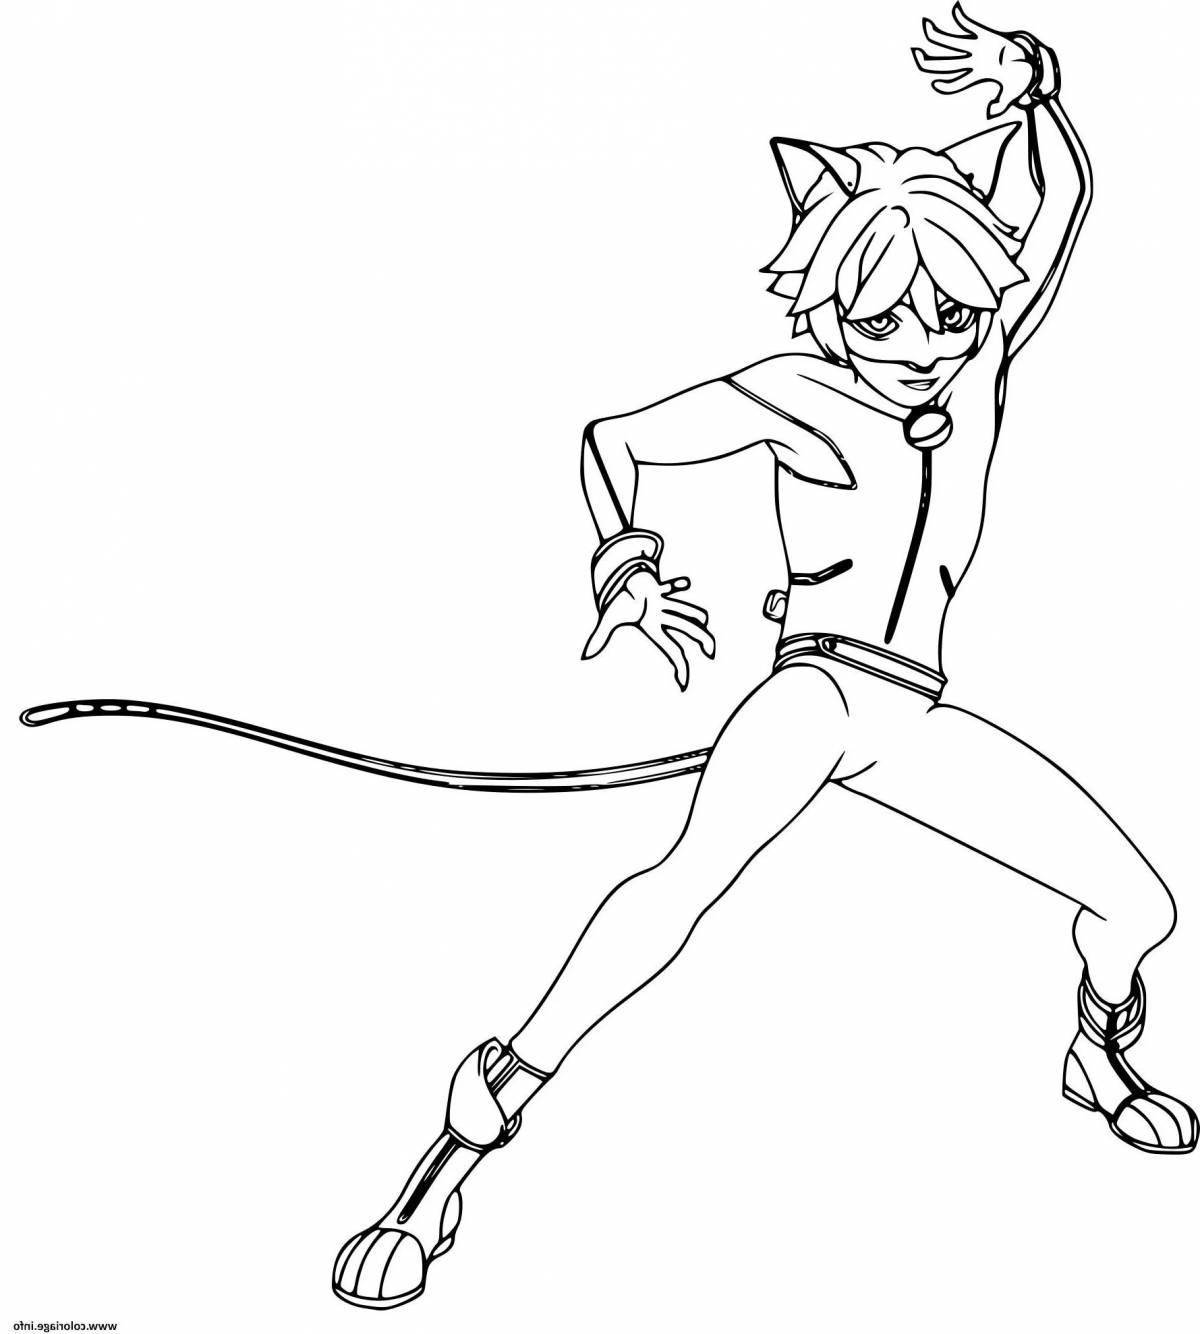 Coloring page energetic cat lady